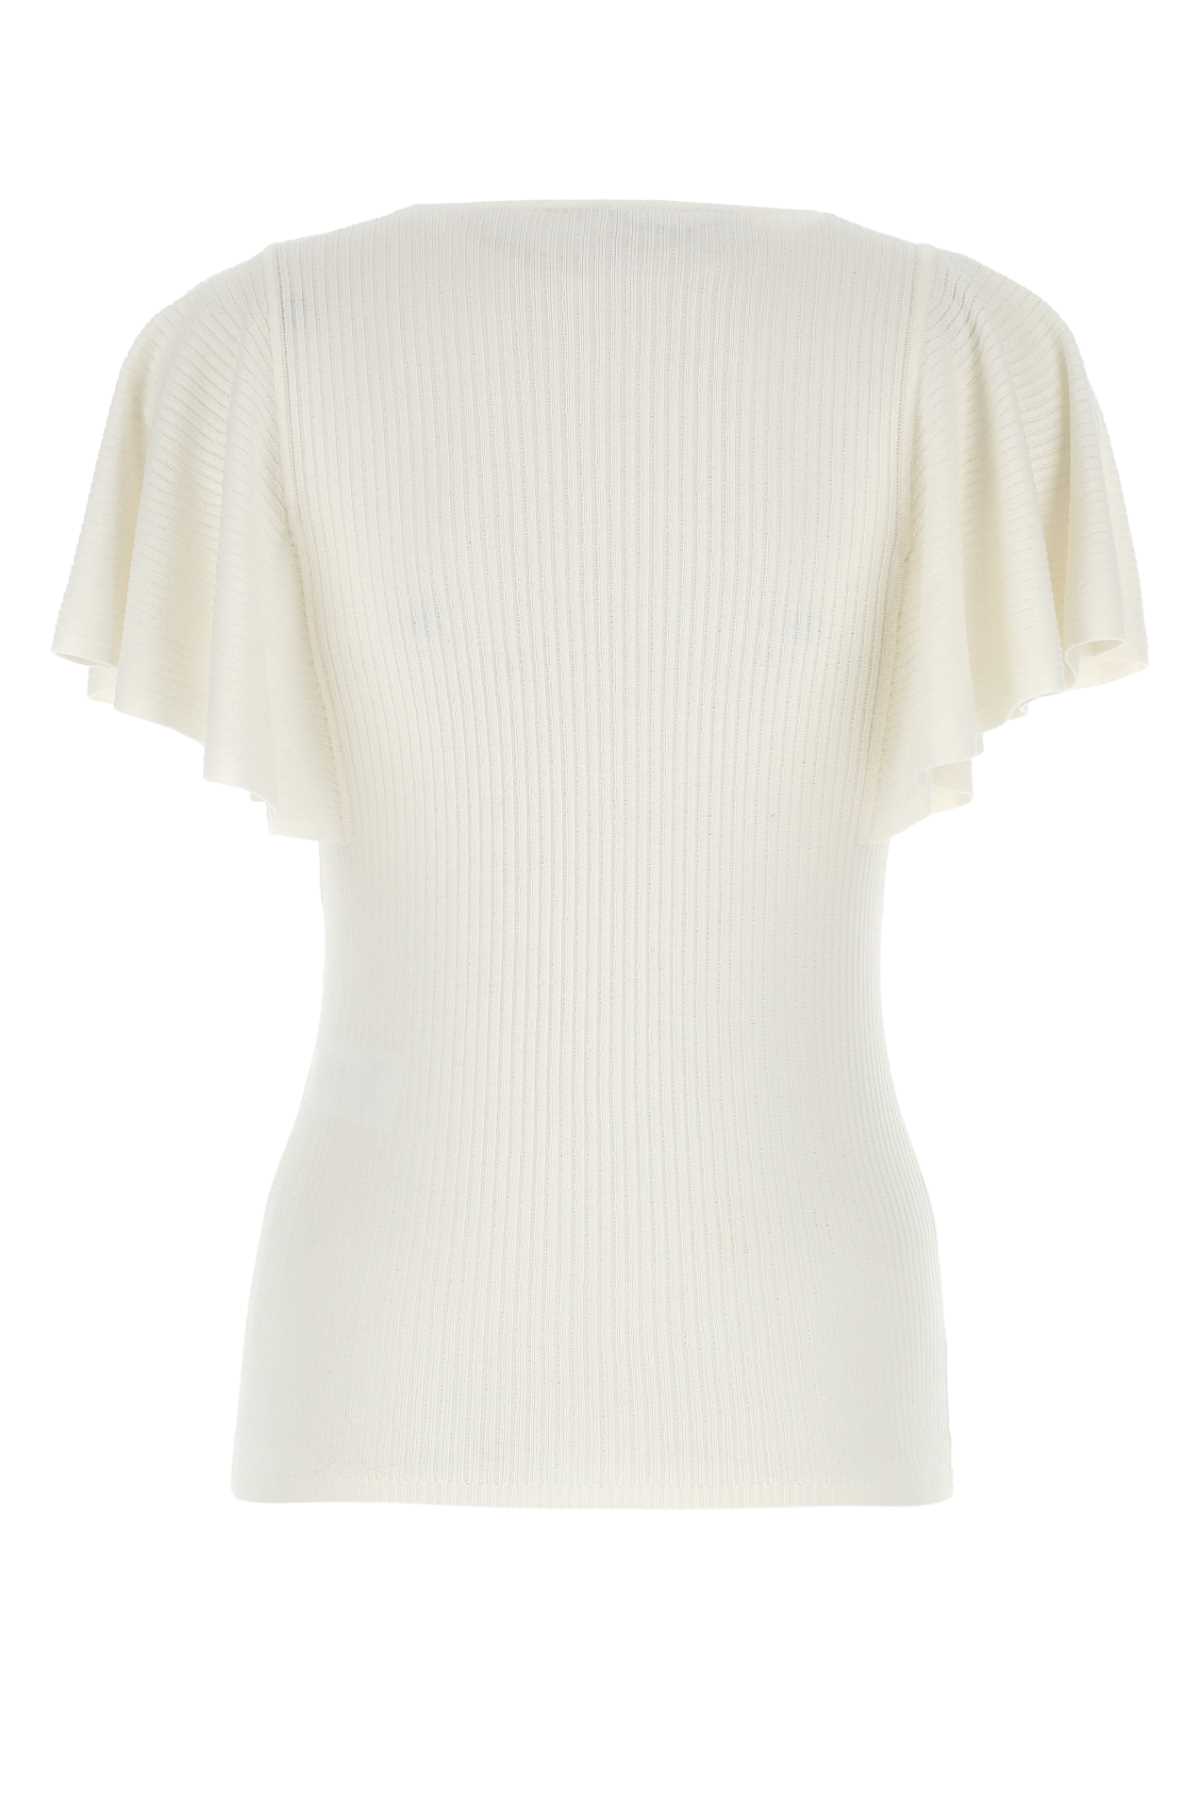 Chloé Ivory Stretch Wool Blend Top In Iconicmilk